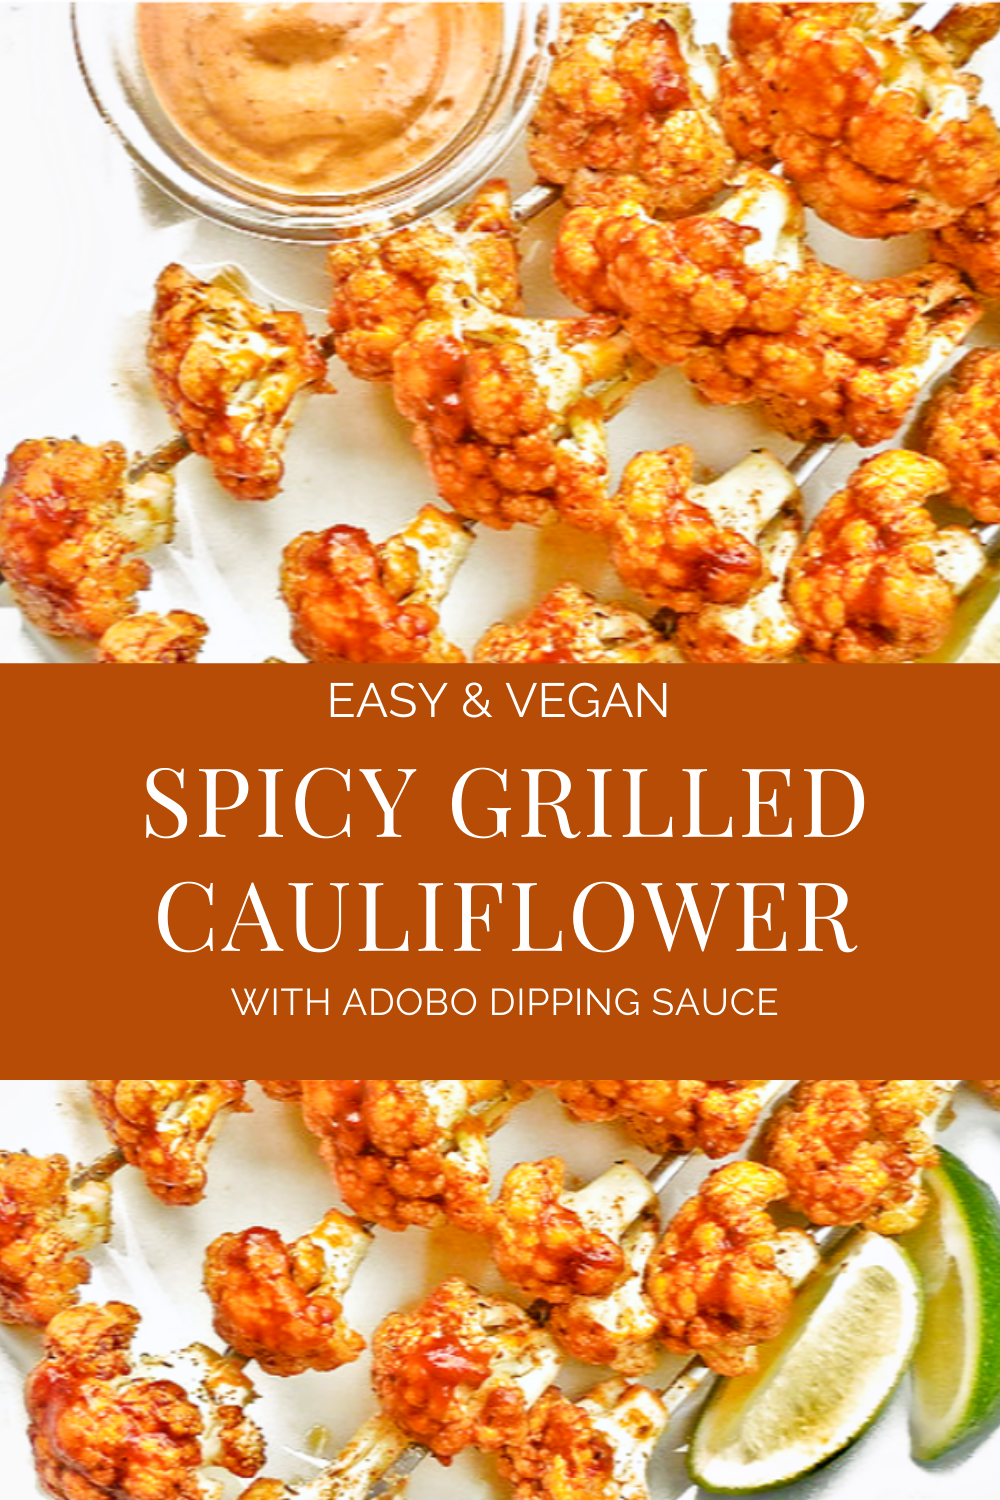 Spicy Grilled Cauliflower with Adobo Dipping Sauce | Easy, crowd-pleasing spicy grilled cauliflower kabobs seasoned with a Cajun-inspired blend of spices and served with homemade adobo dipping sauce. via @thiswifecooks